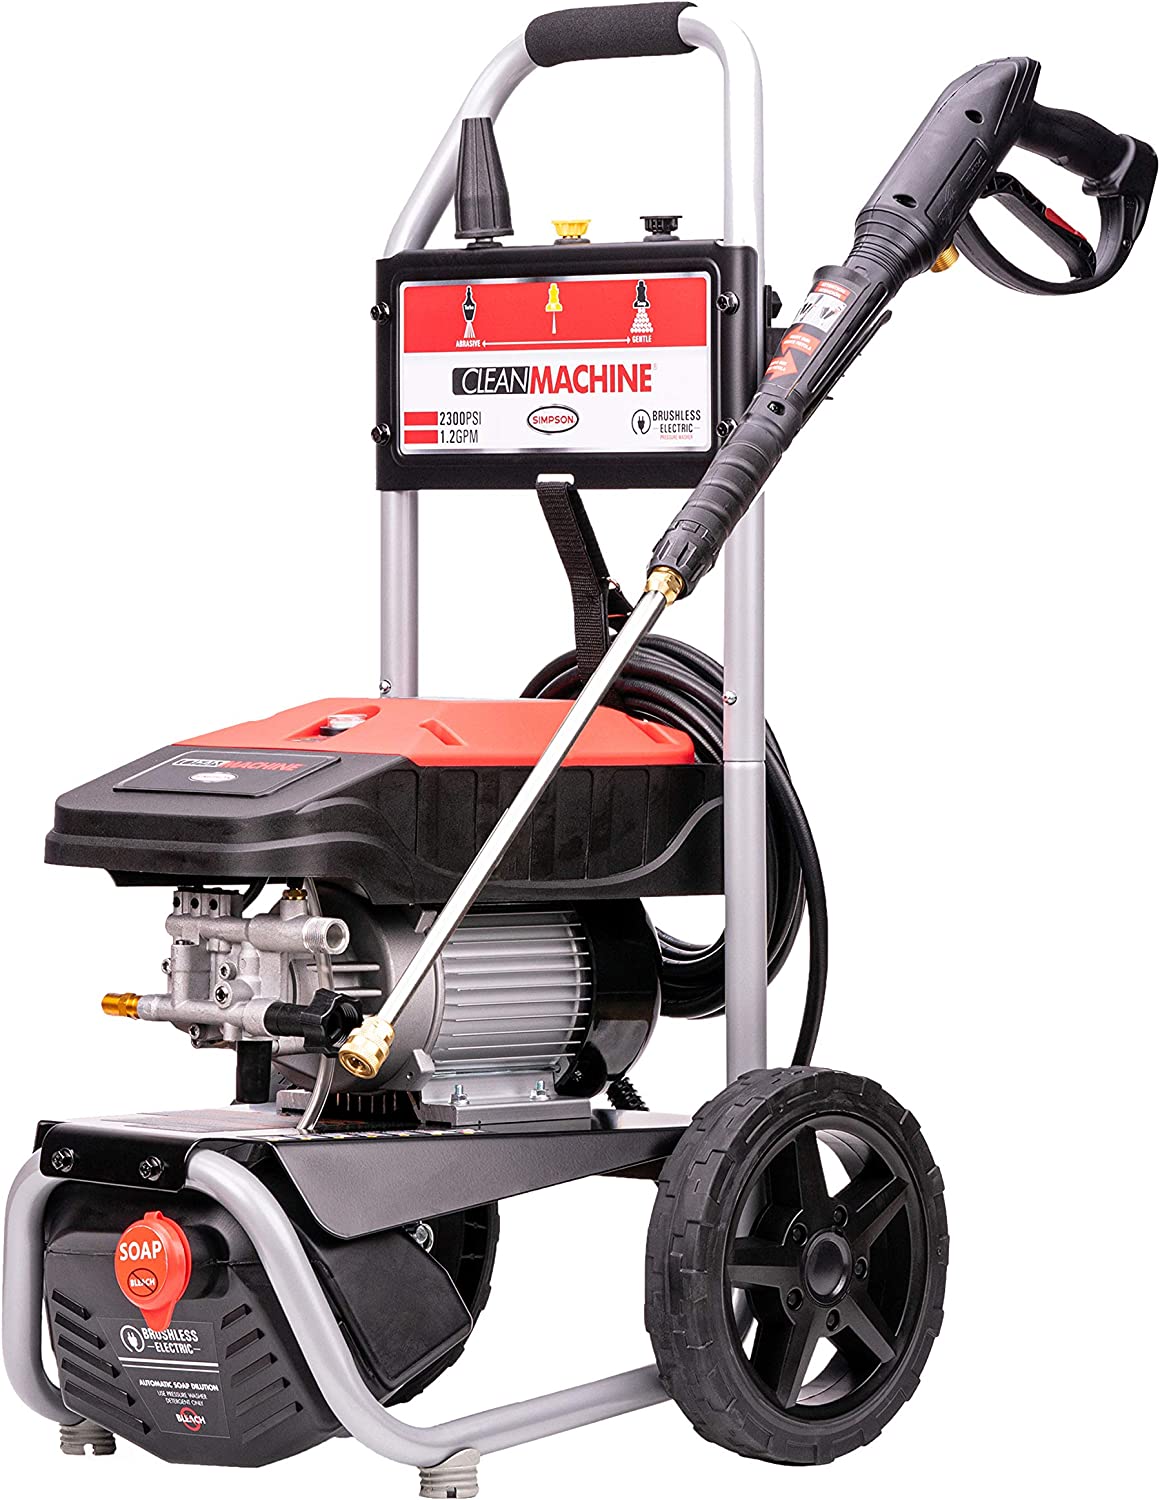 Simpson Cleaning 61016 Corrosion Resistant Gas Pressure Washer, 2300-PSI